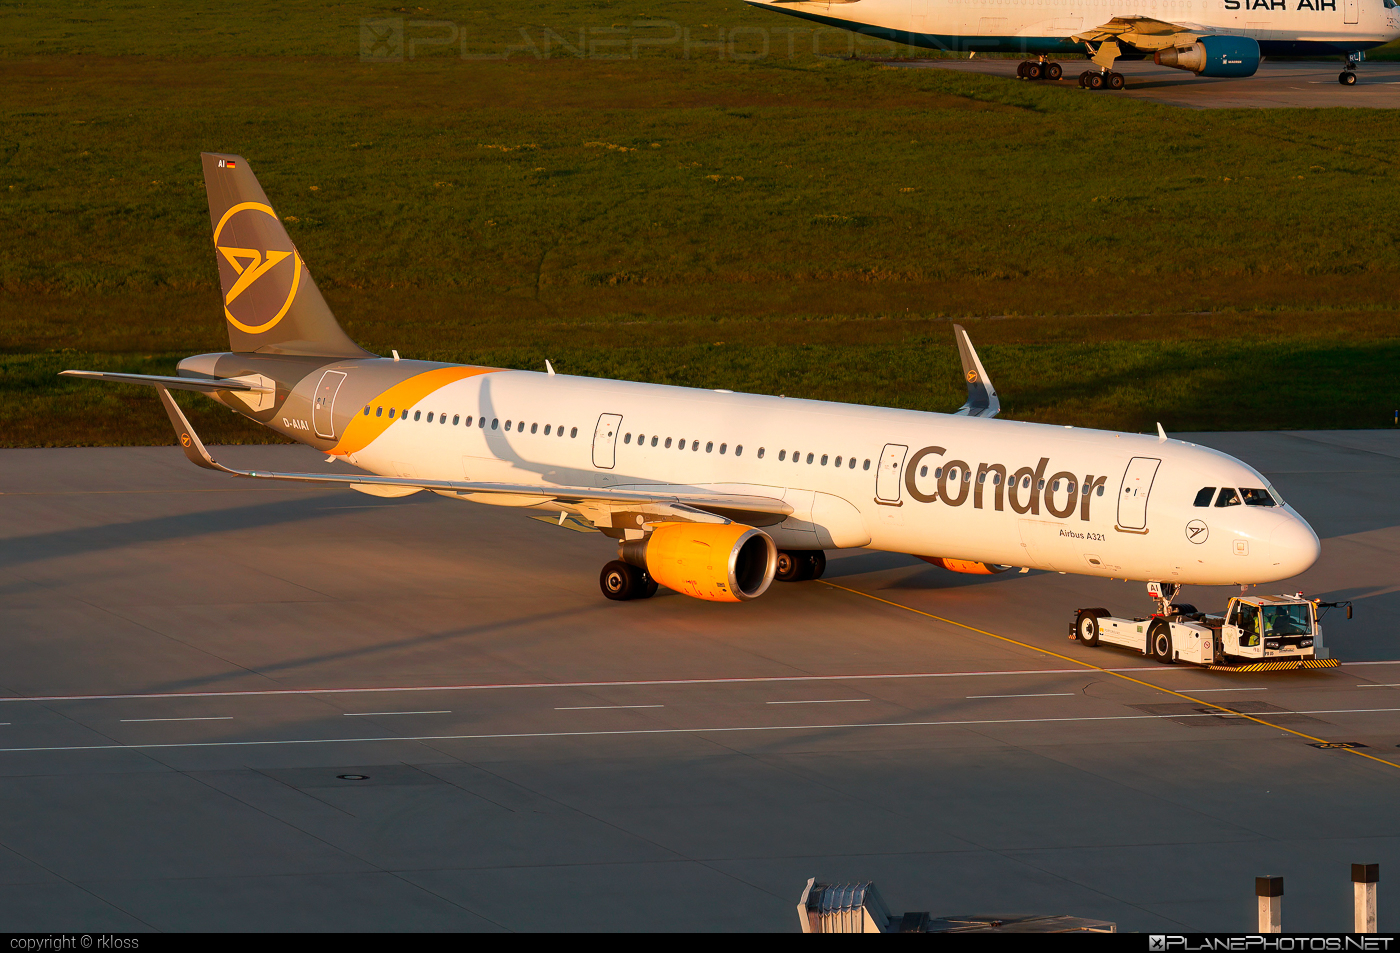 Airbus A321-211 - D-AIAI operated by Condor #a320family #a321 #airbus #airbus321 #condor #condorAirlines